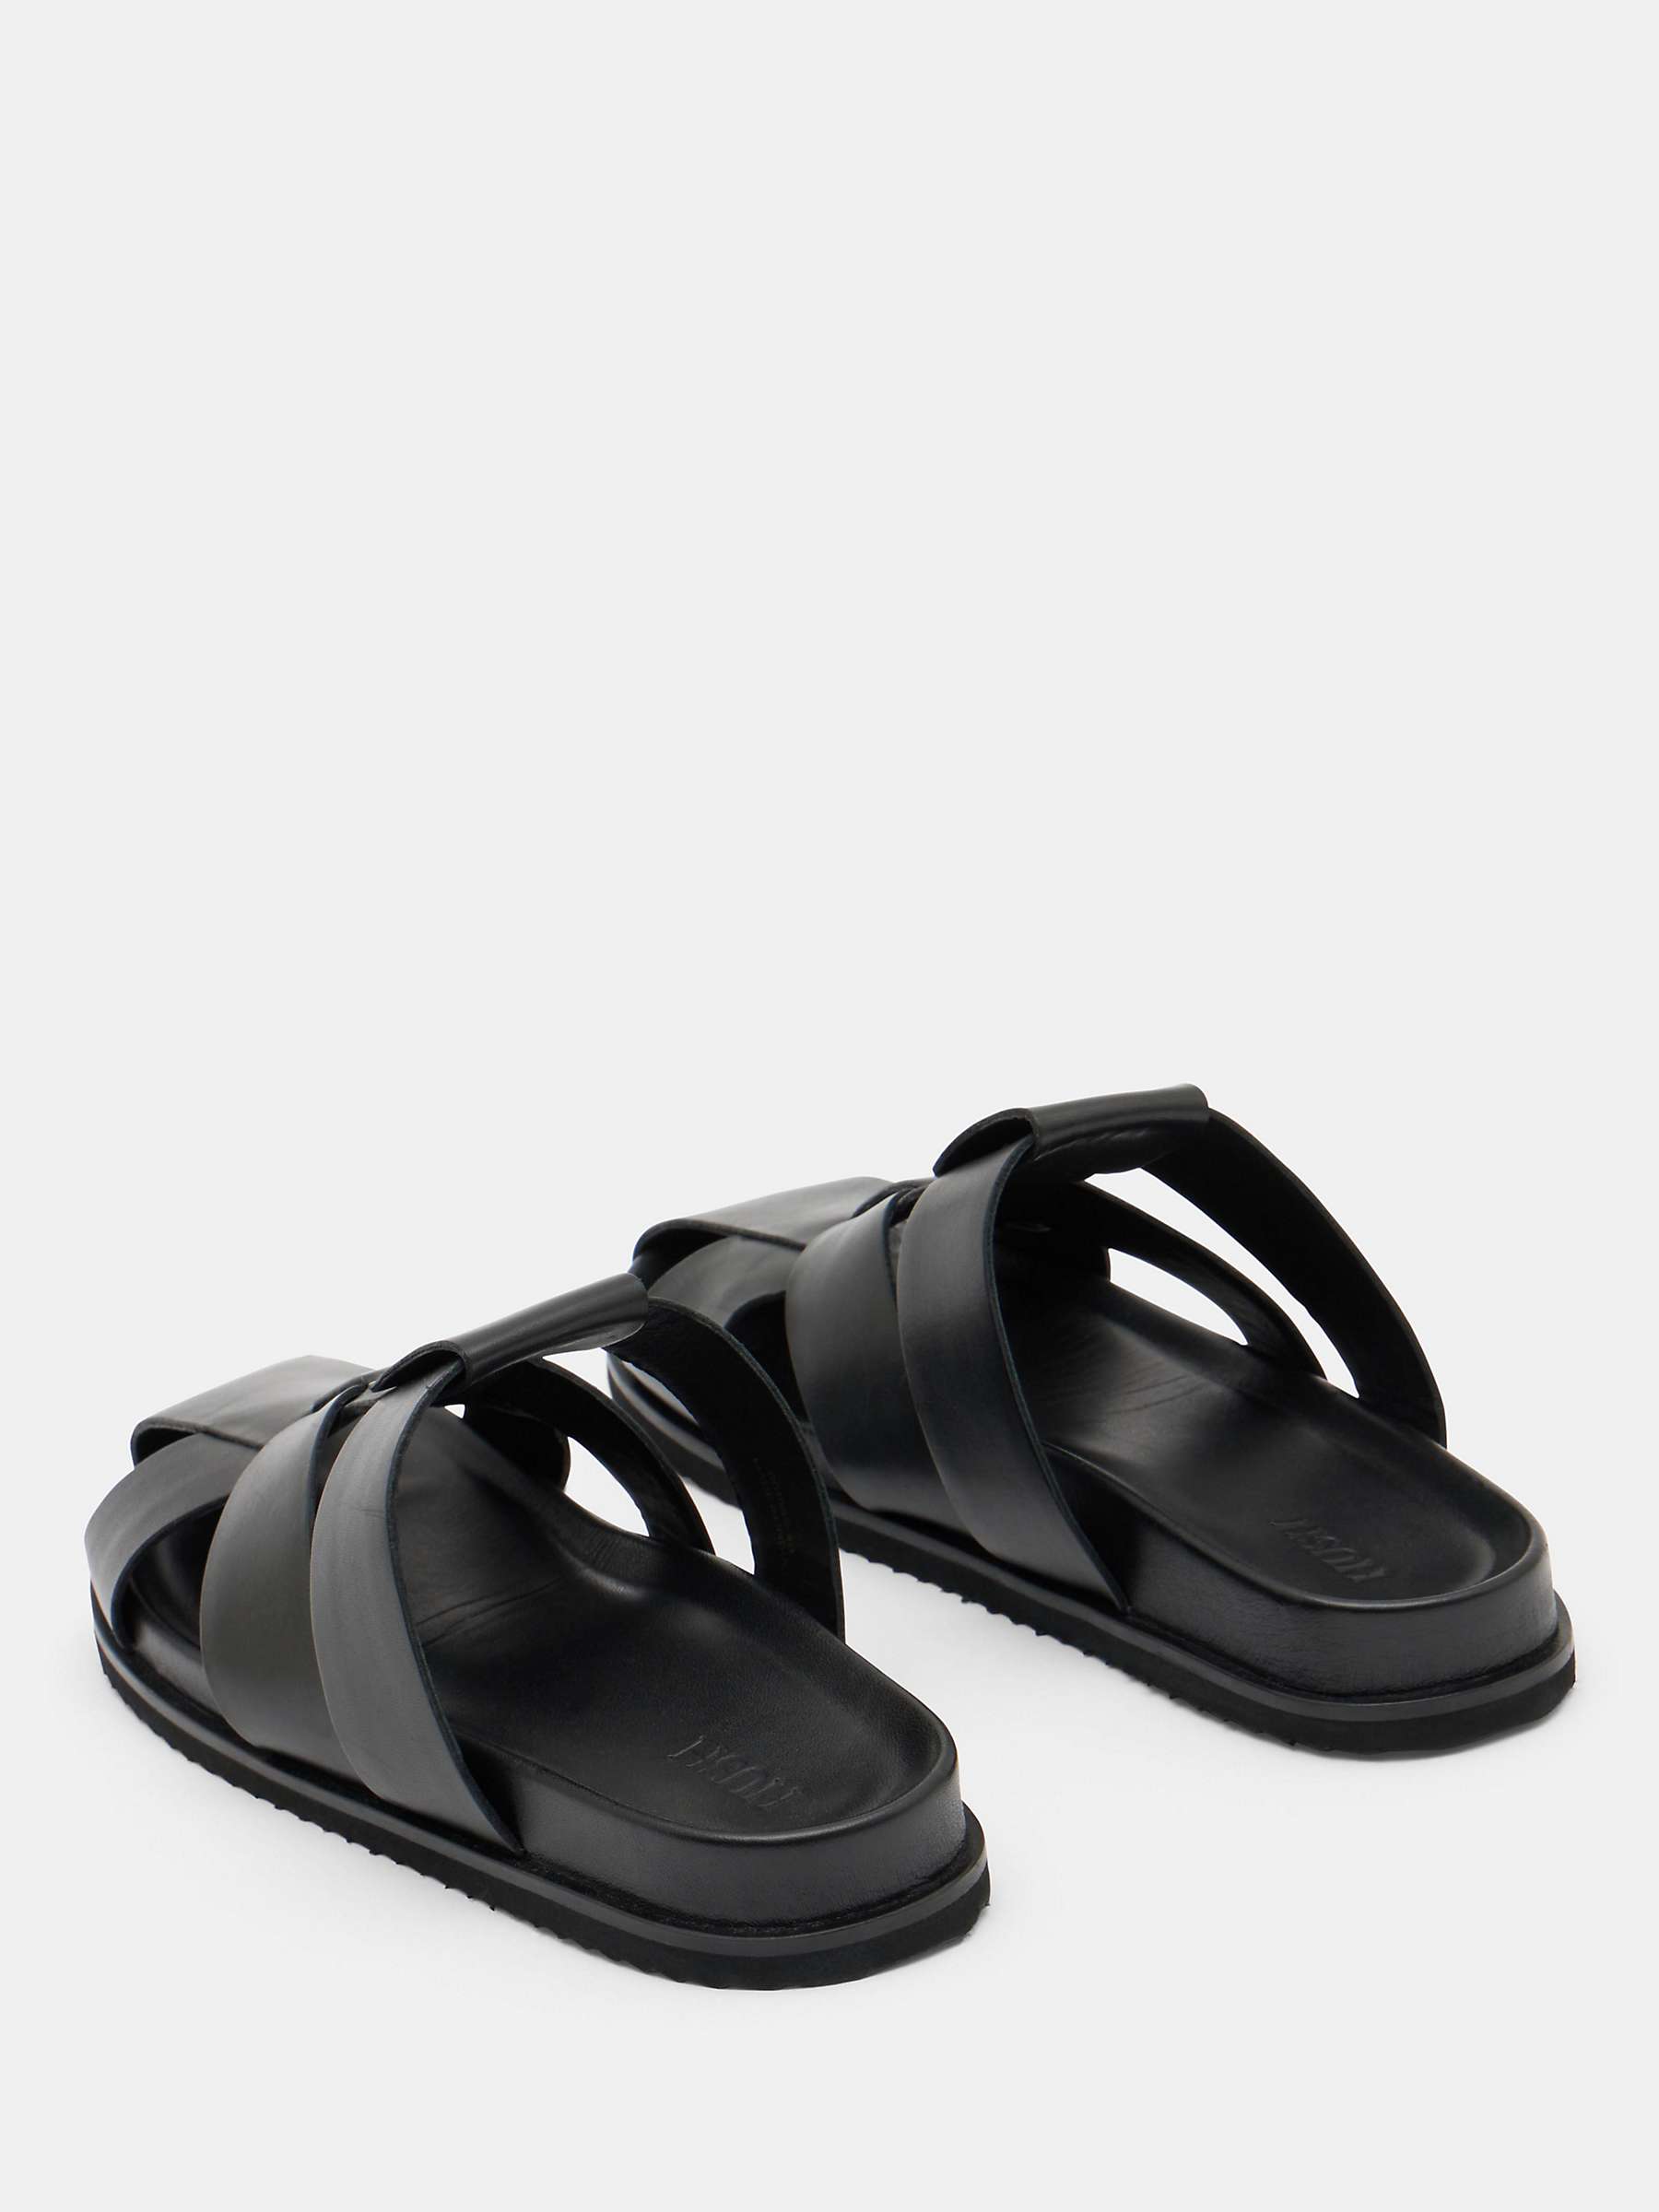 Buy HUSH Cora Closed Toe Leather Cage Sandals, Black Online at johnlewis.com